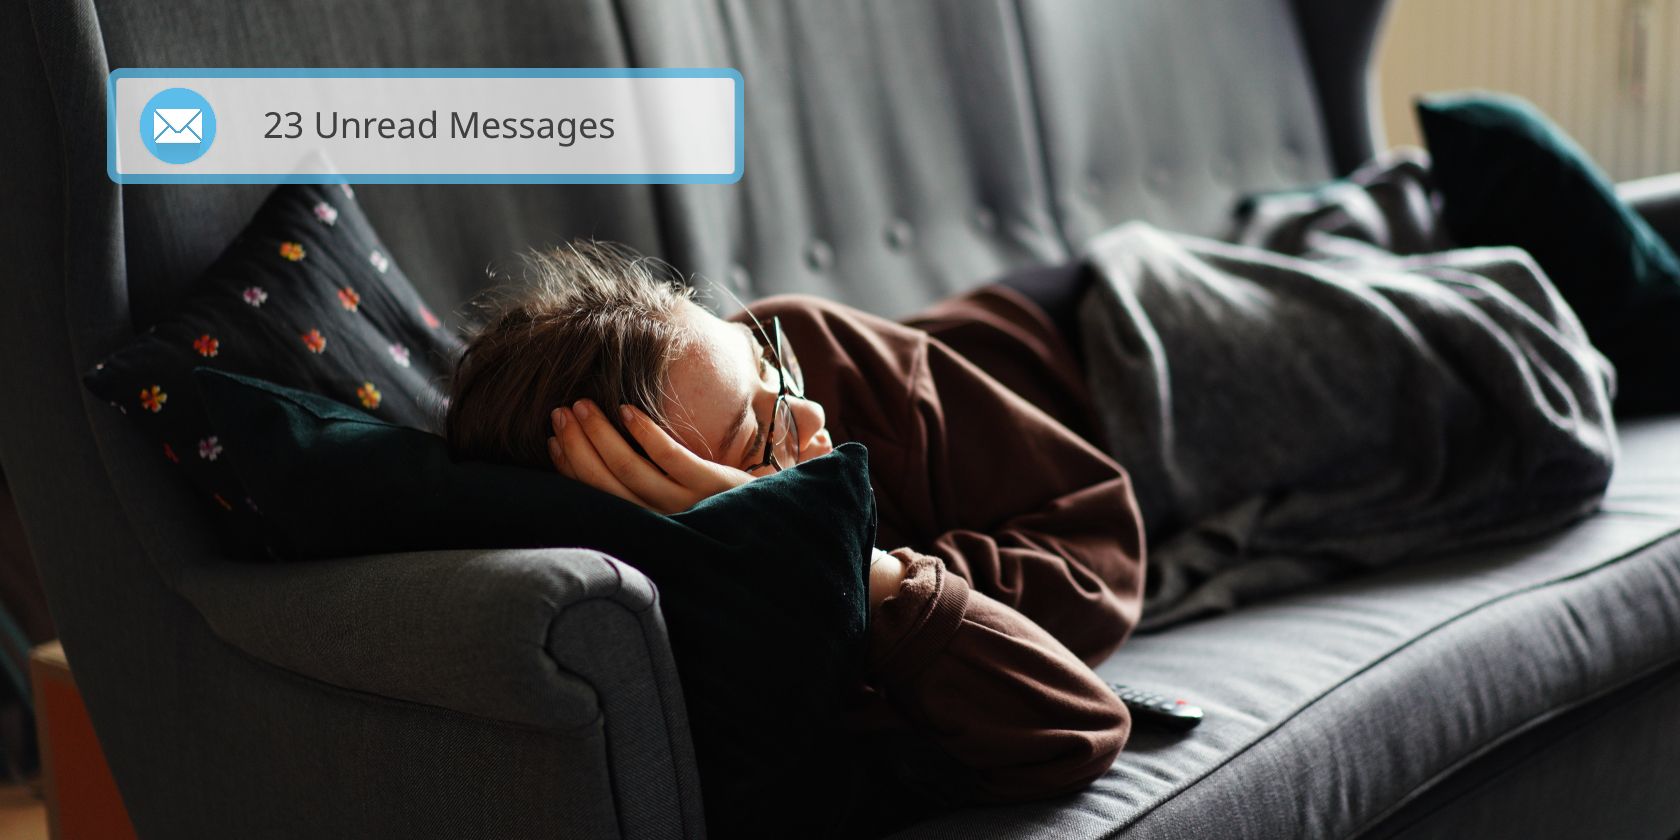 person sleeping on couch looking exhausted. A notification reminds them that they have several unread emails.